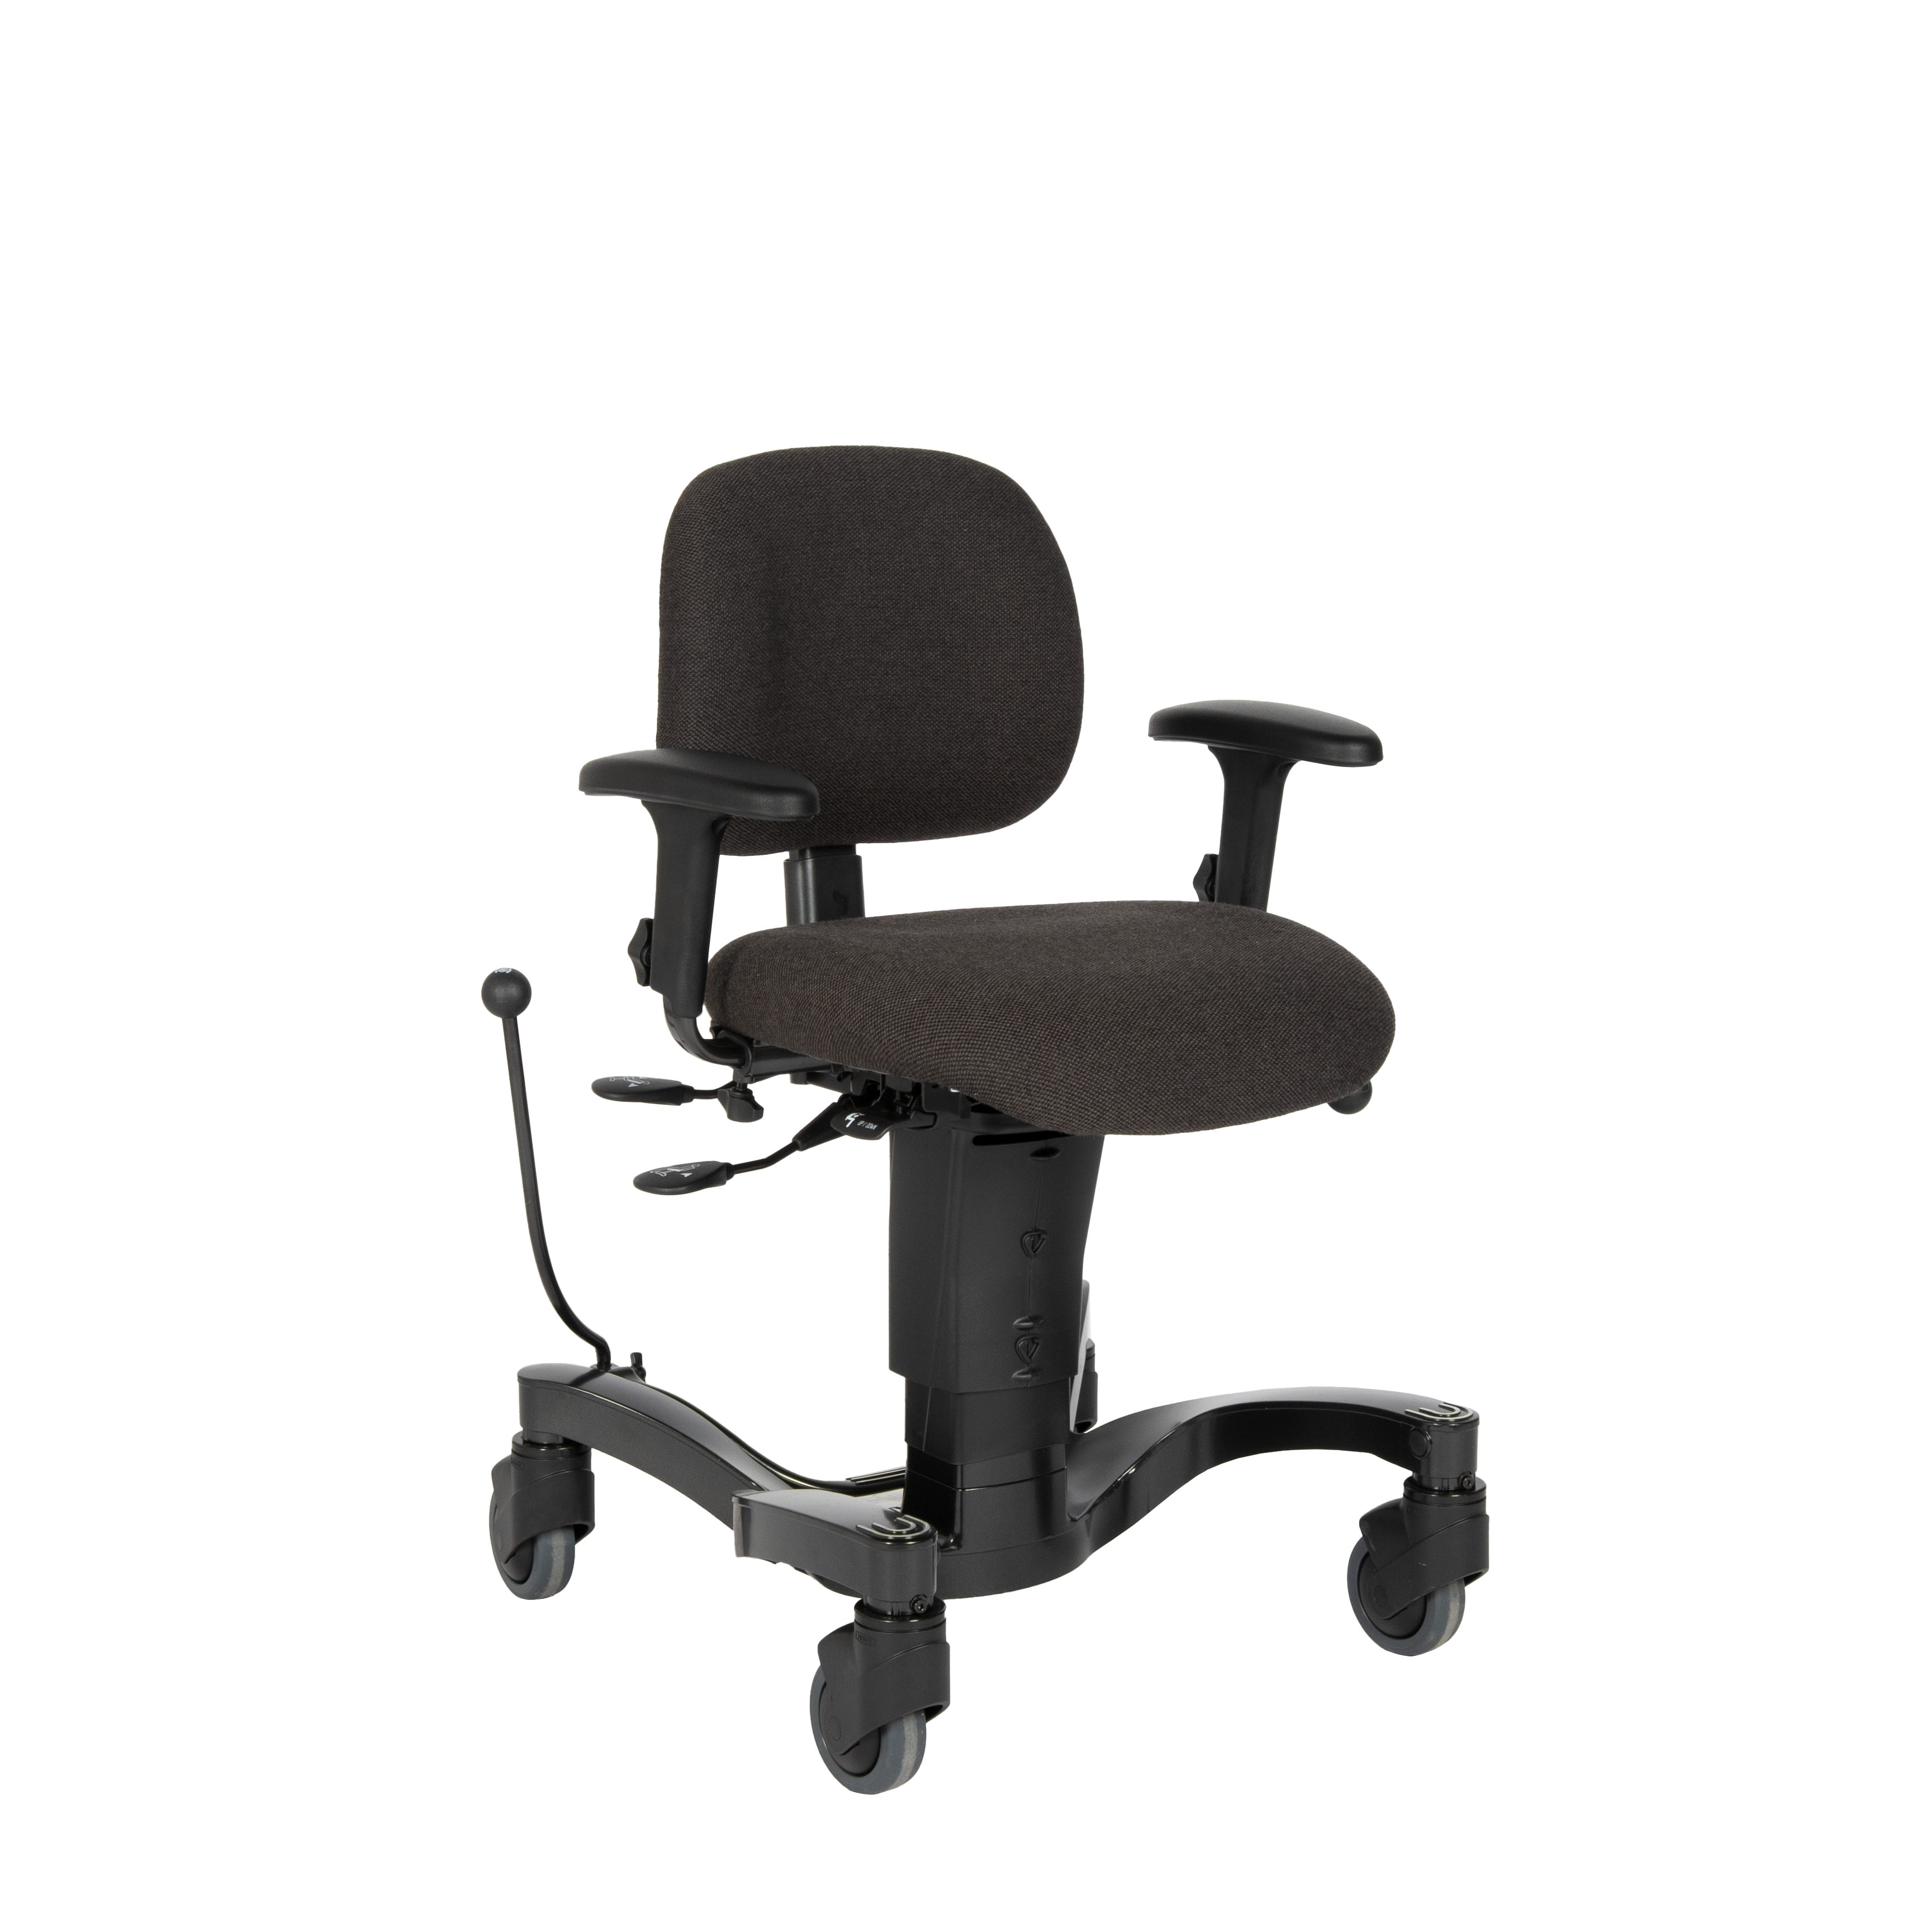 Vela tango 700 with active backrest in medium front right image